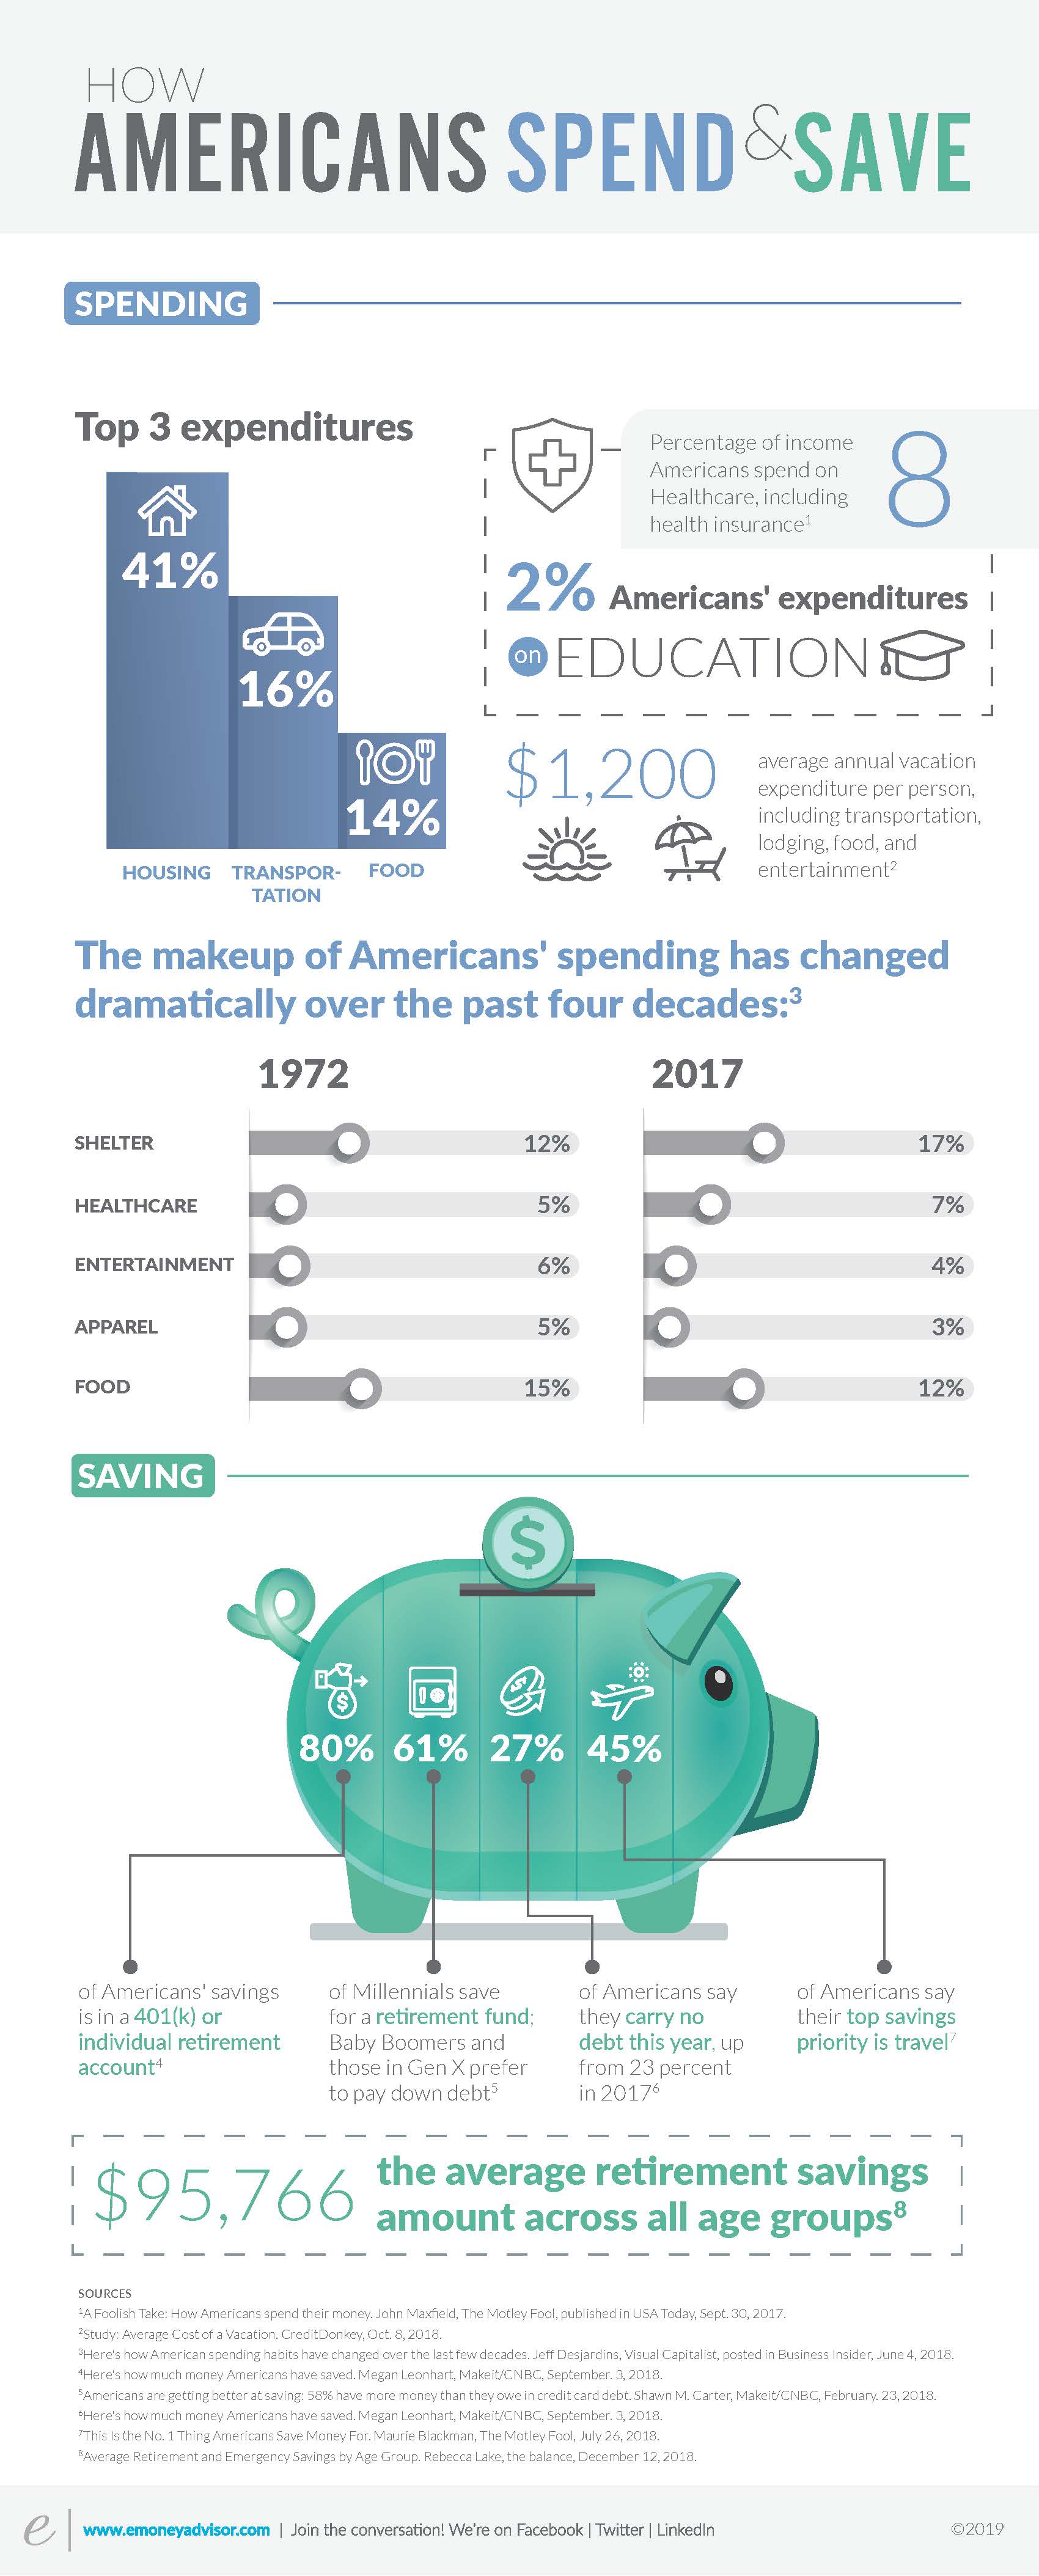 The top 3 expenditures are: 41% housing, 16% transportation, and 14% food. Americans spend 2% one education. On the savings side, 80% of Americans’ savings is in a 401(k) or IRA, 27% of Americans say they carry no debt this year, up from 23% in 2017; 45% of Americans say their top savings priority is travel. $95,766 is the average retirement savings amount across all age groups. 